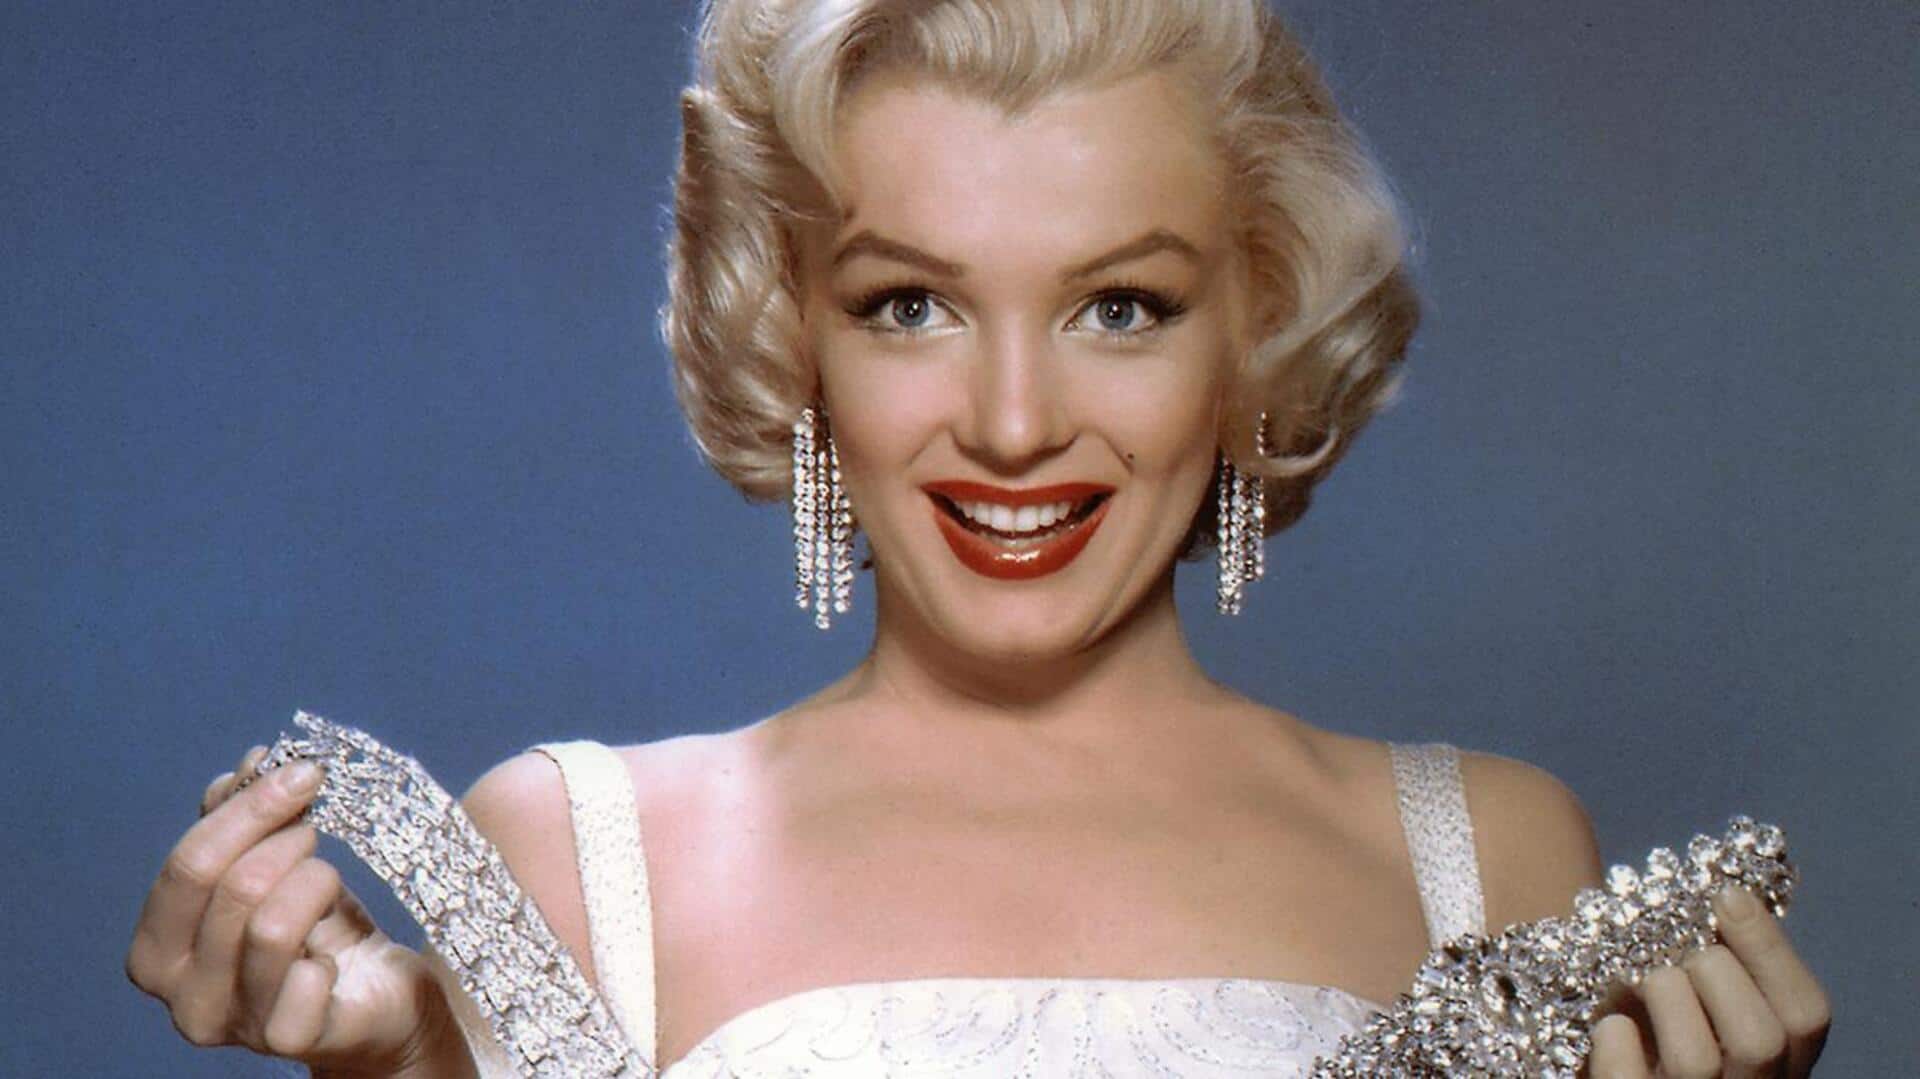 Marilyn Monroe's most celebrated works